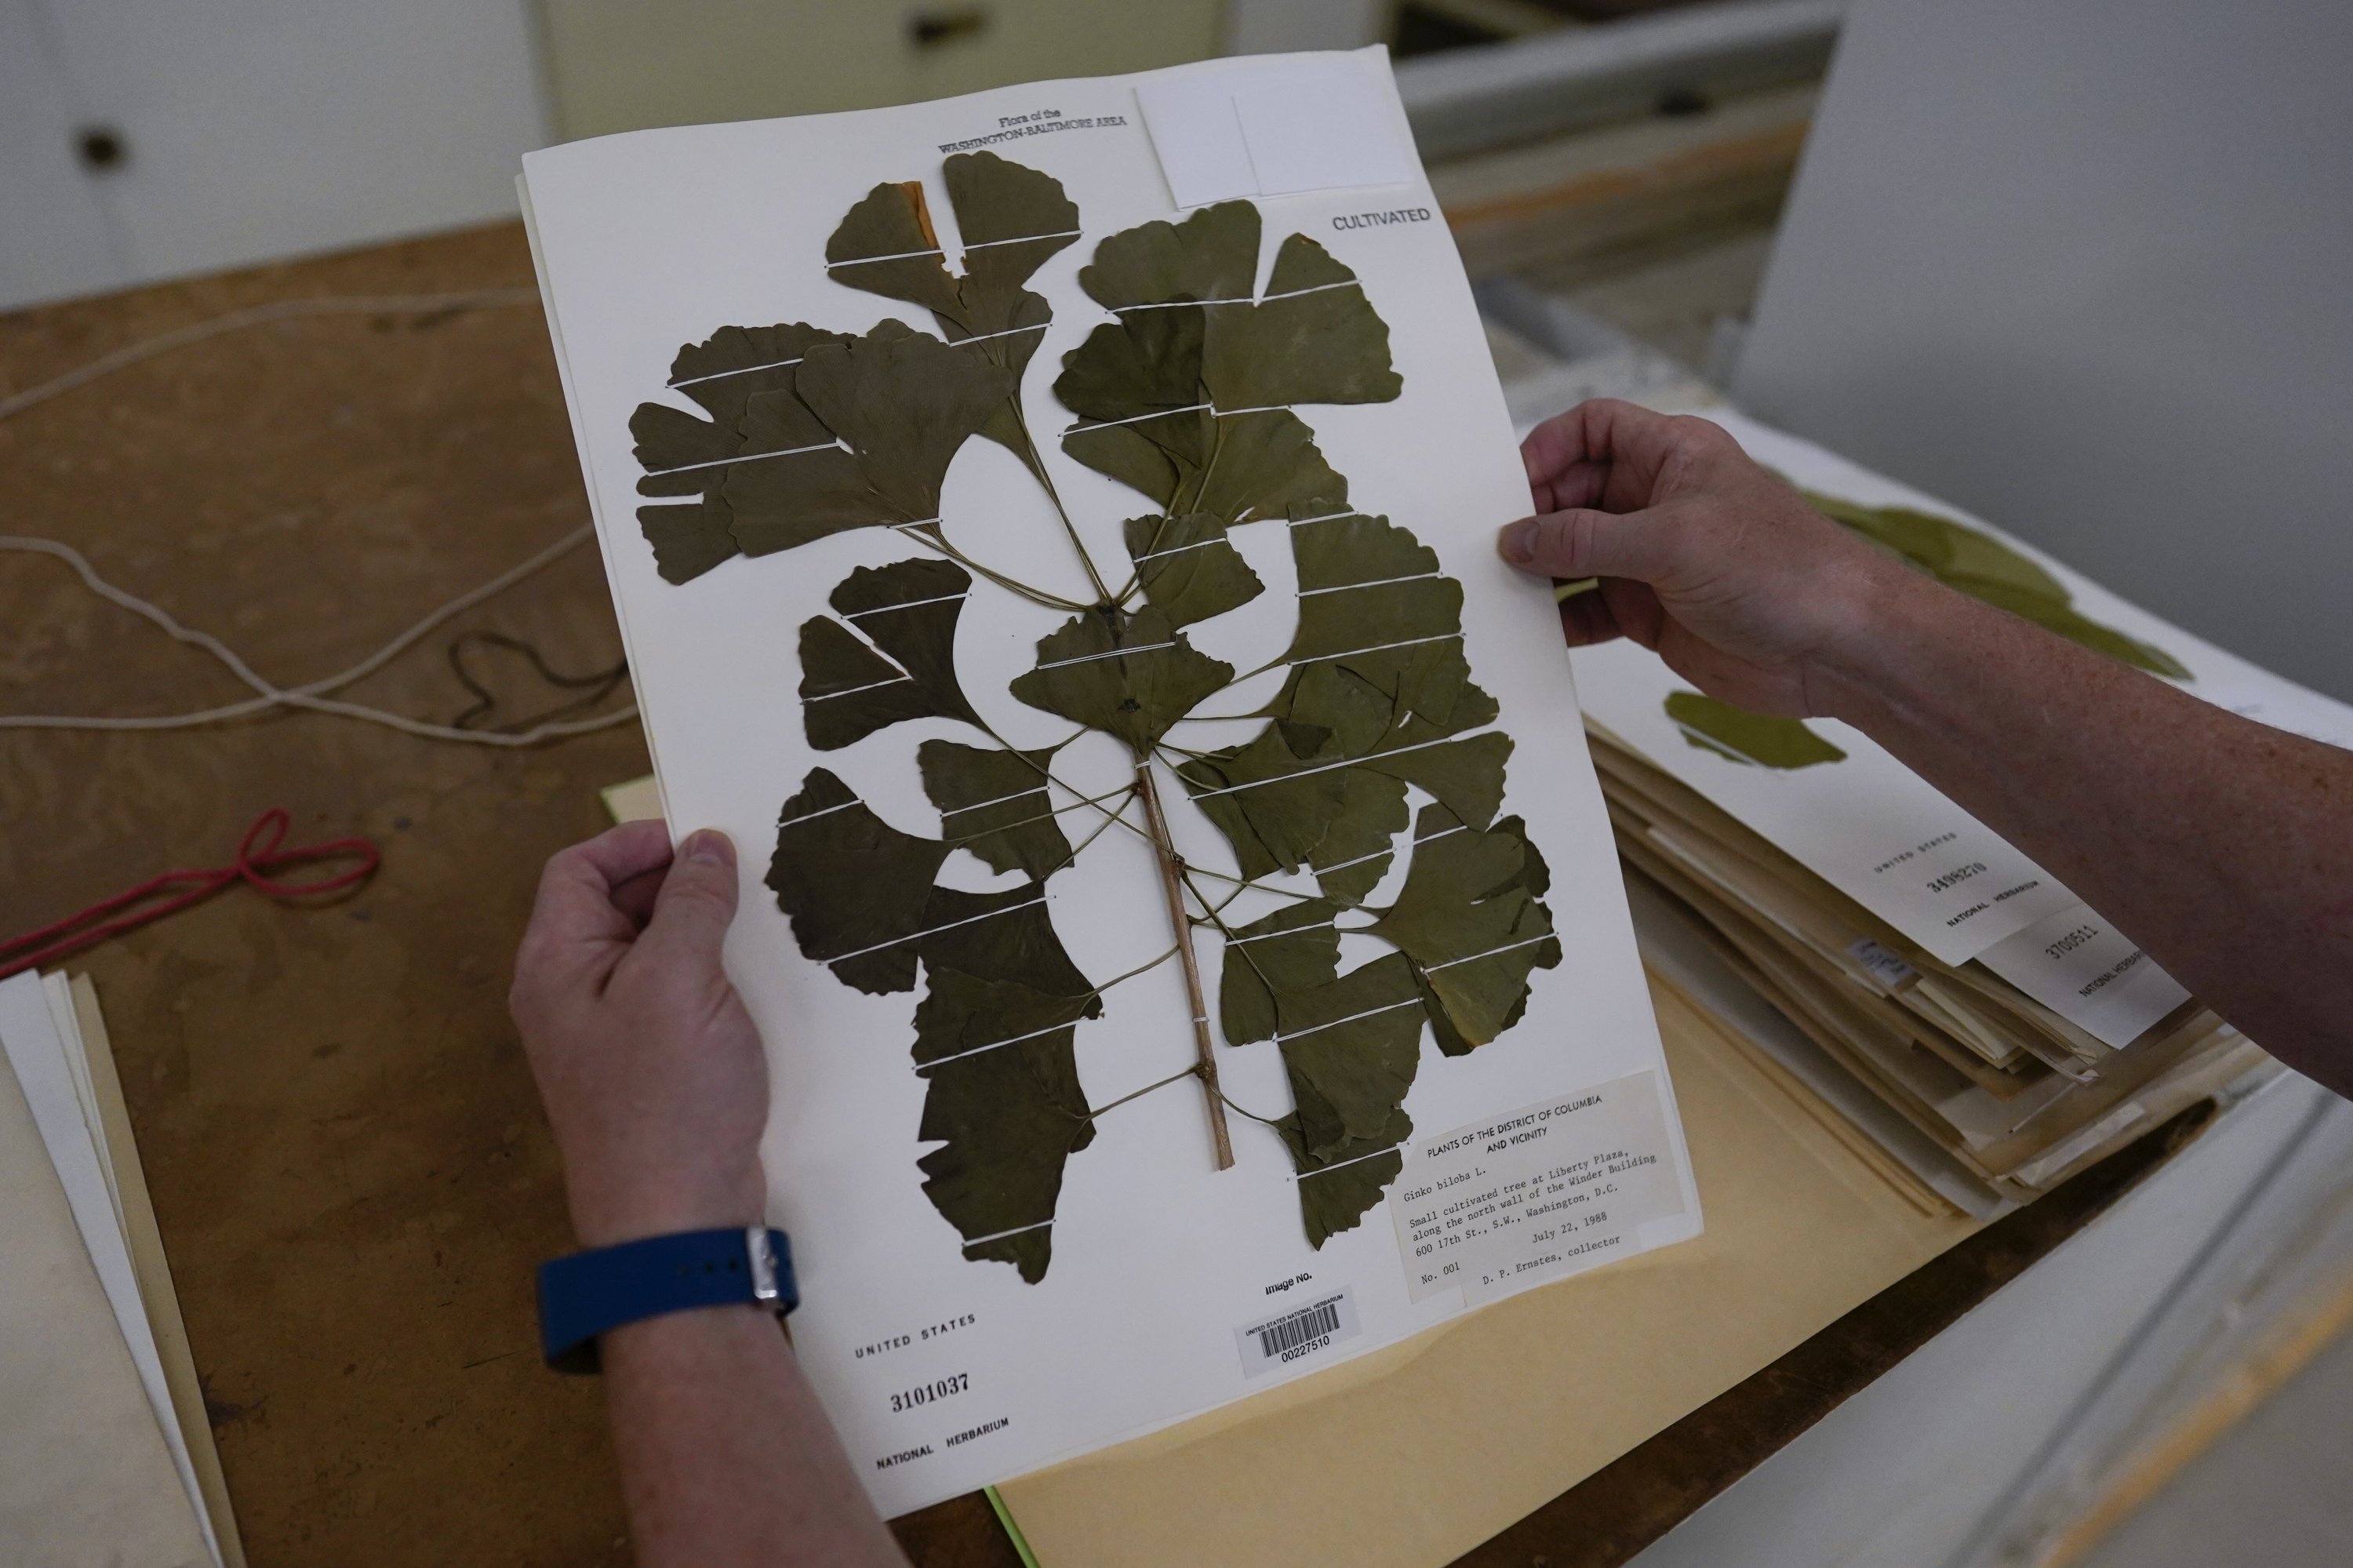 Rich Barclay, Smithsonian research geologist and director of the Fossil Atmospheres Project, holds a display of ginkgo leaves collected from a tree in southwest Washington, D.C., in 1988, in the archives of the National Museum of Natural History in Washington, U.S., June 4, 2021. (AP Photo)